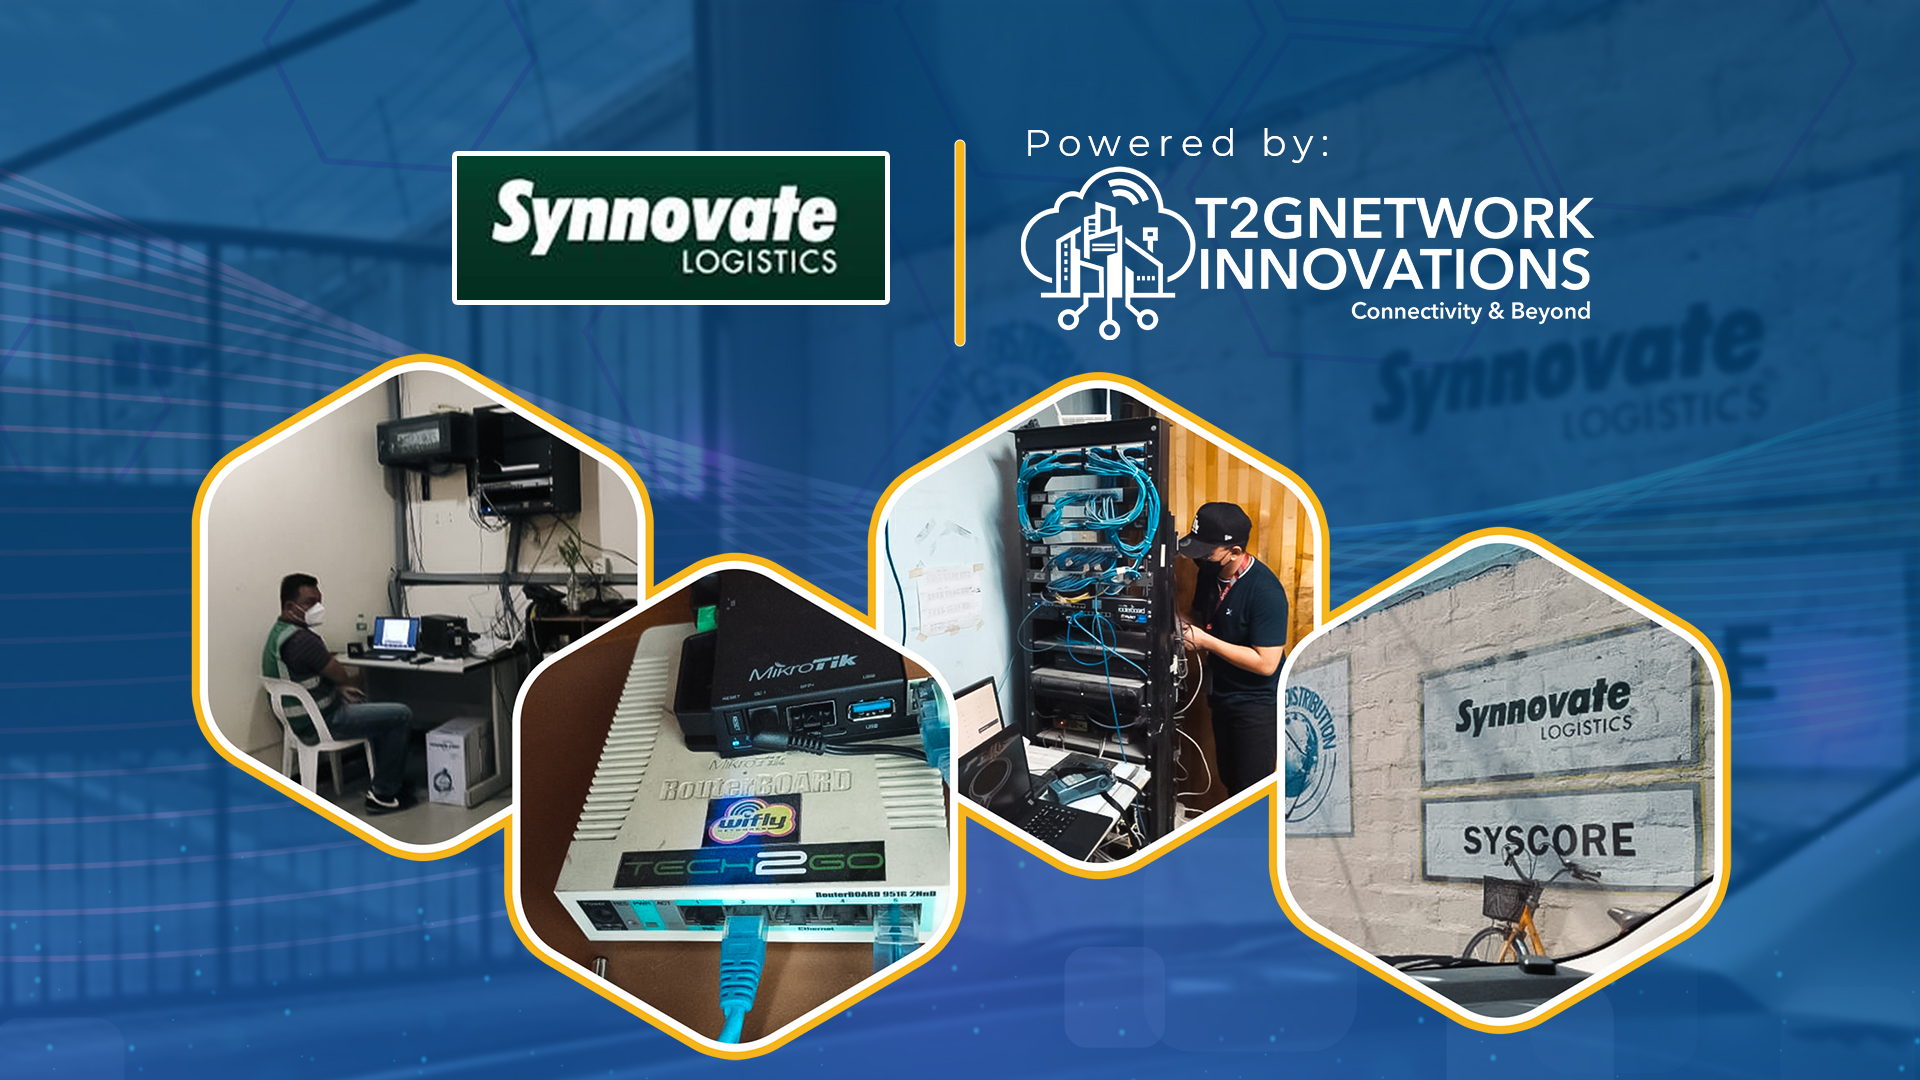 WiFLY Private Networks Manages Synnovate Sites Nationwide